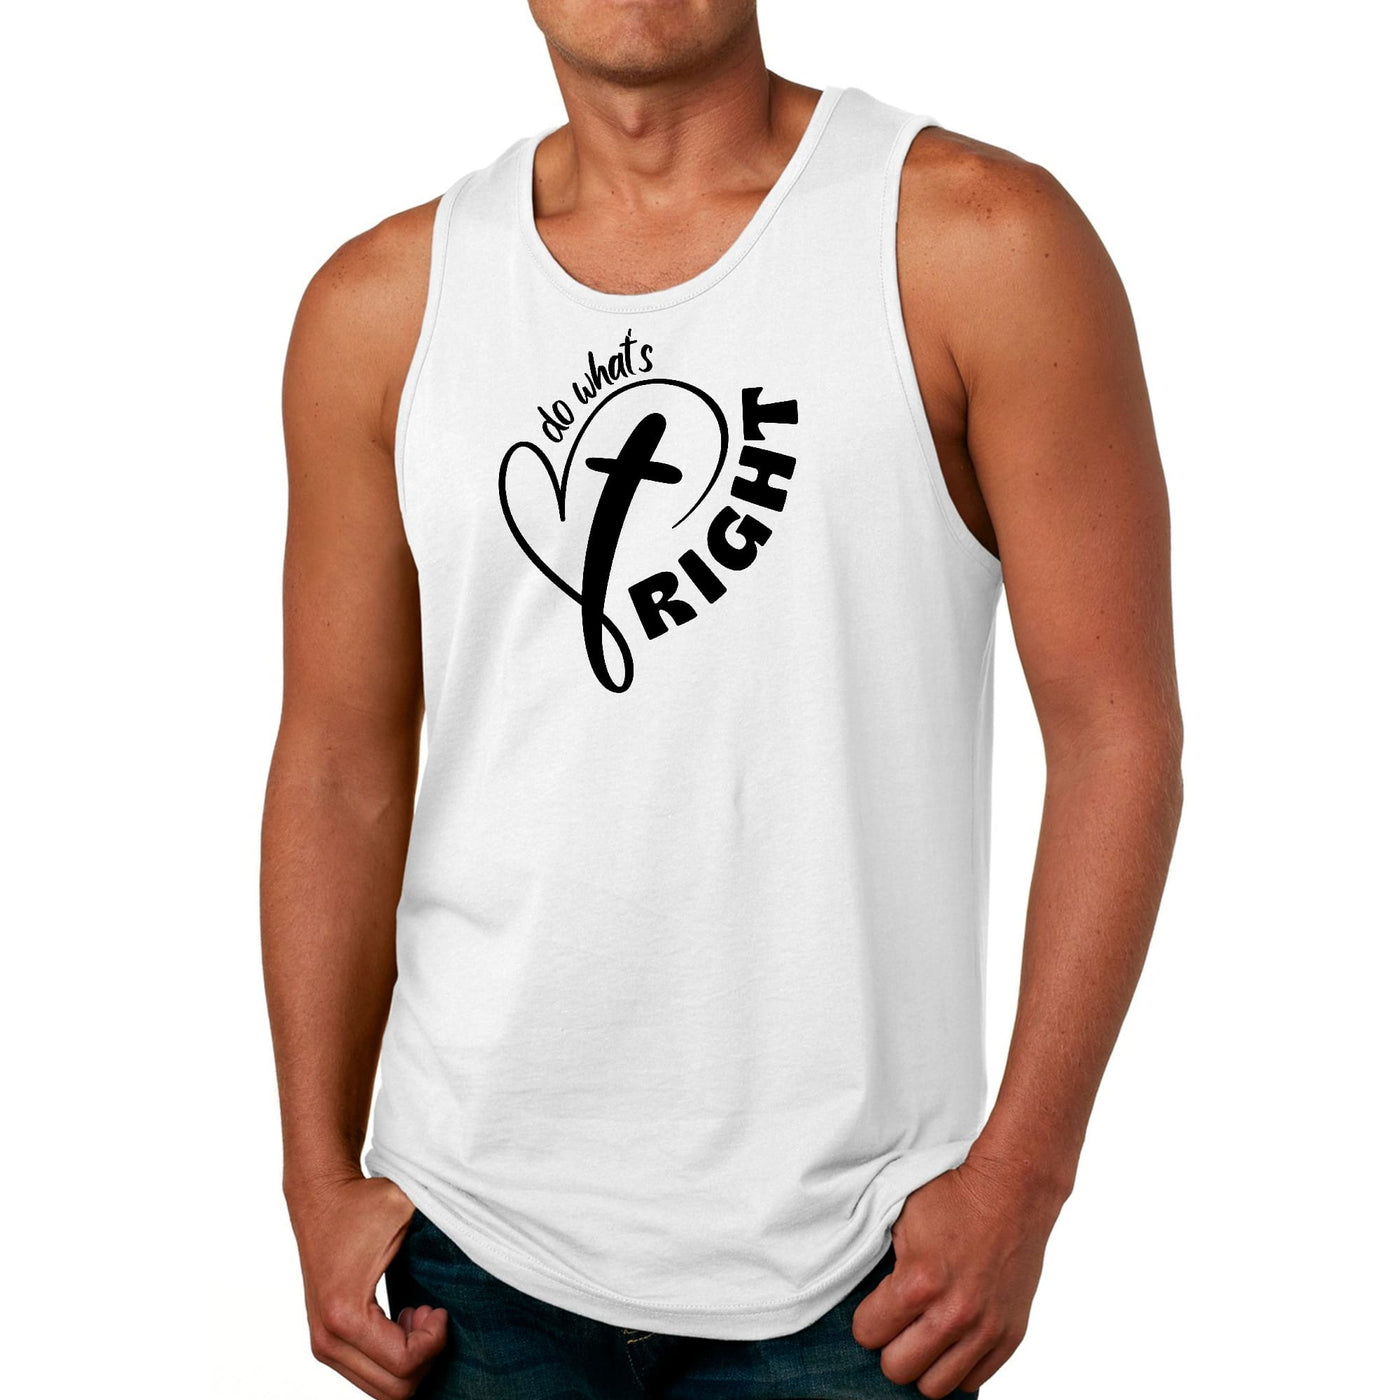 Mens Fitness Tank Top Graphic T-shirt Say It Soul - Do What’s Right - Mens